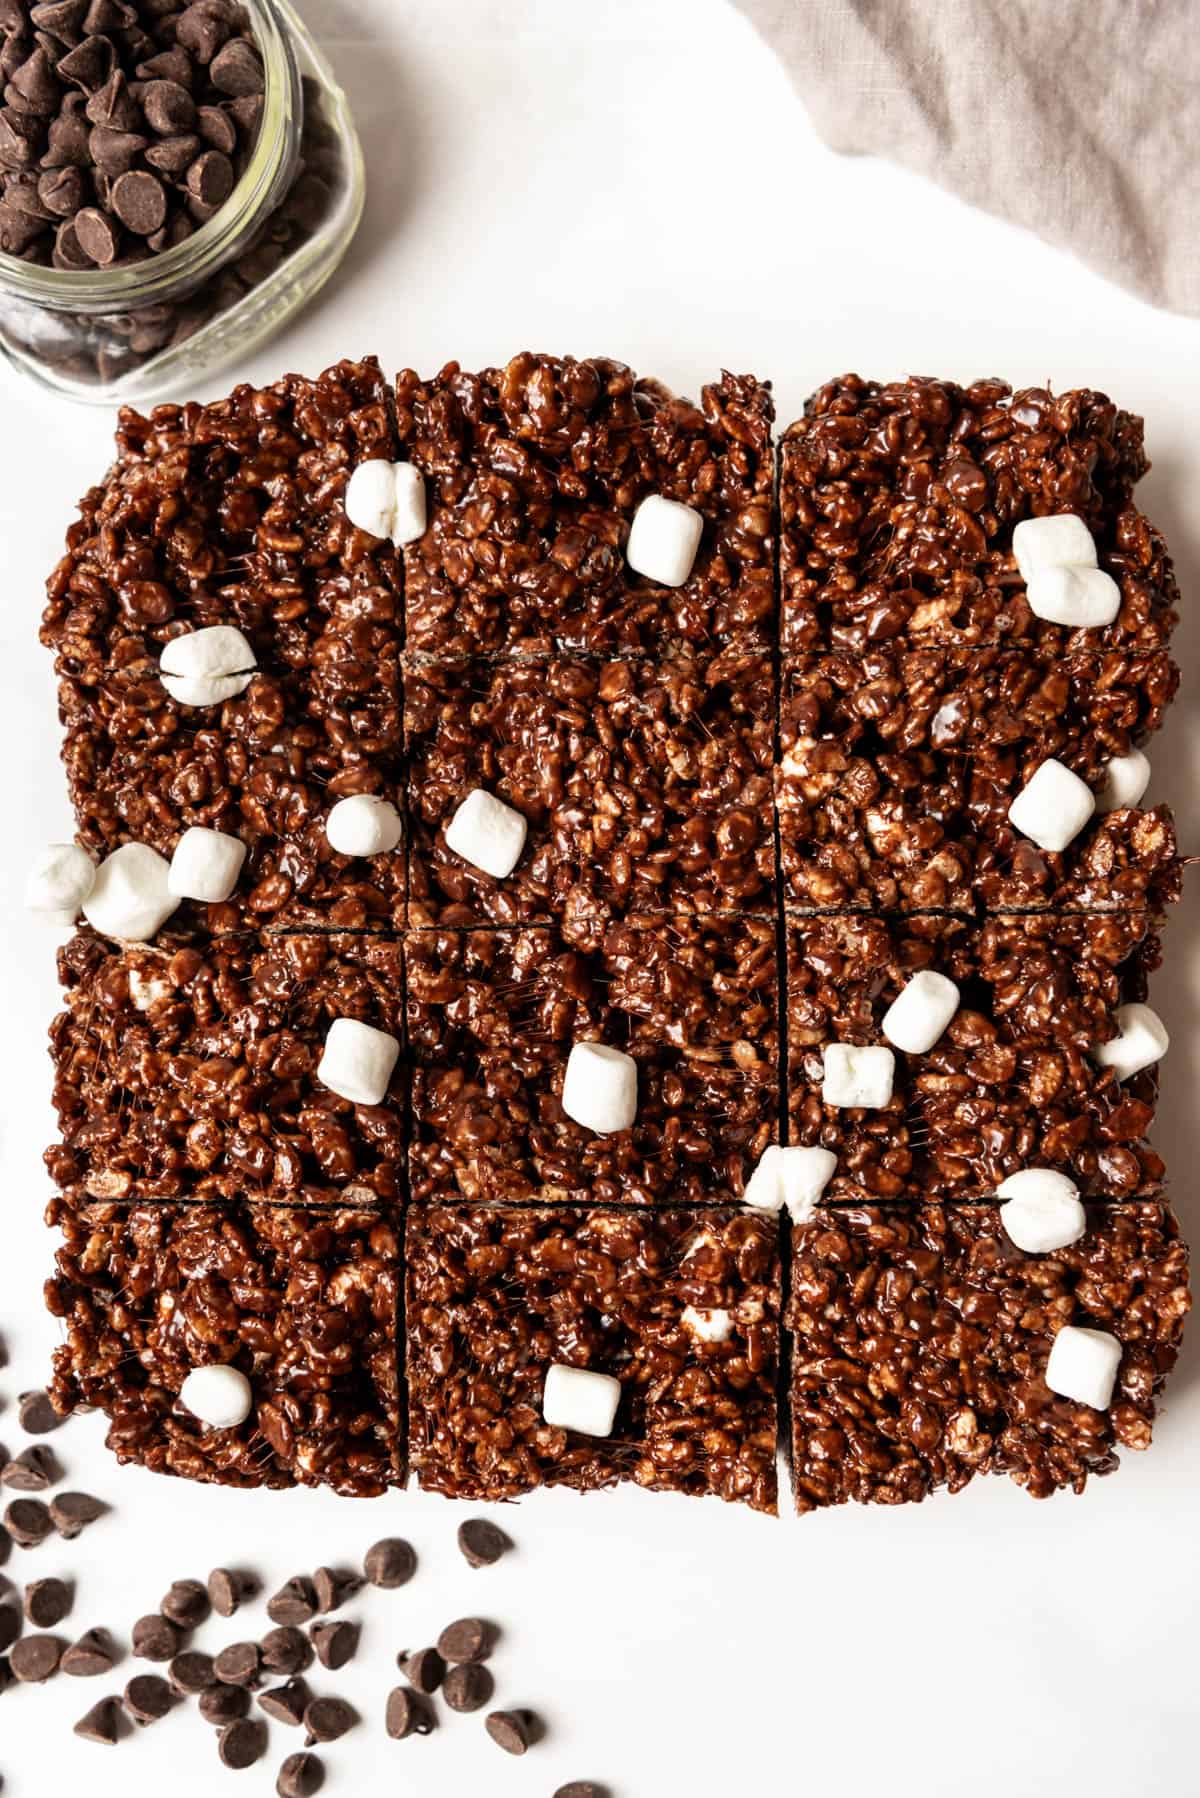 An overhead image of chocolate rice krispies treats cut into squares.